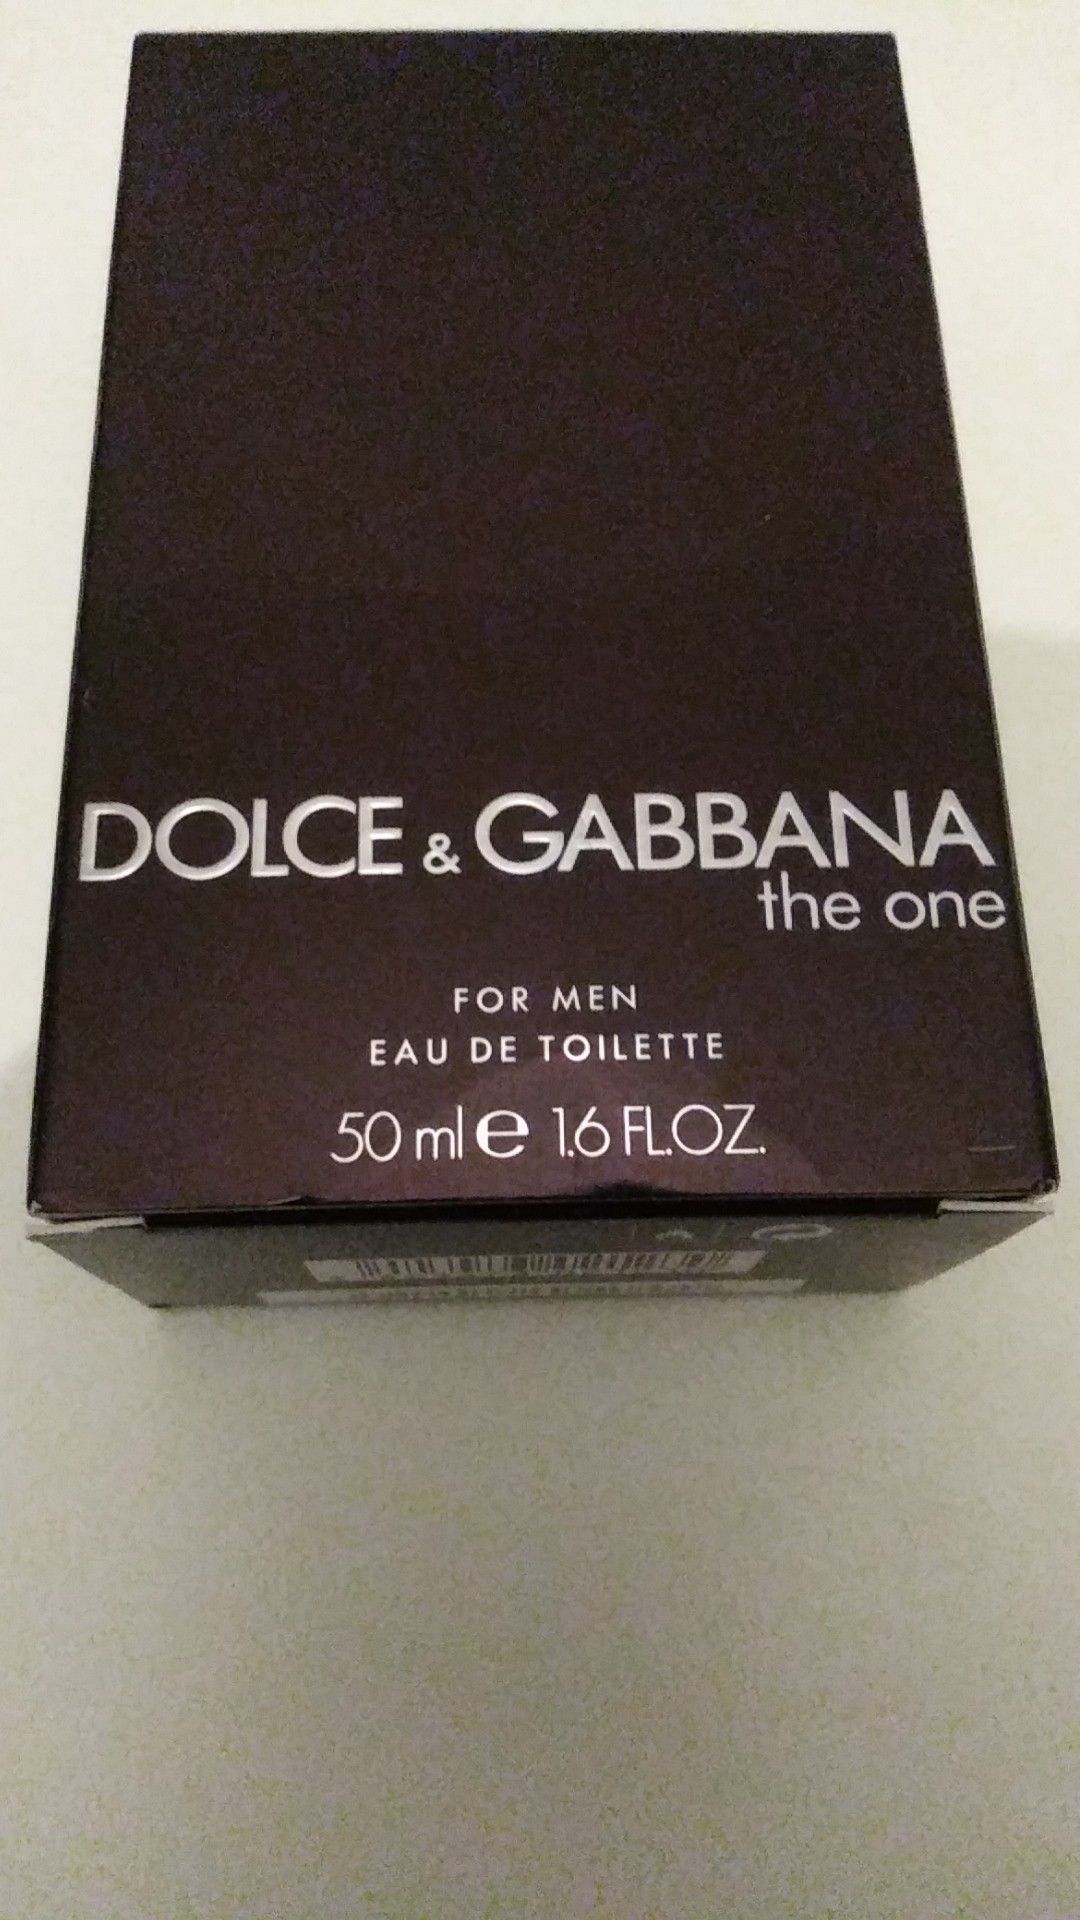 Brand new (never used) dolce & gabbana the one 50ml 1.6floz cologne in great shape and condition just need gone please its (urgent)